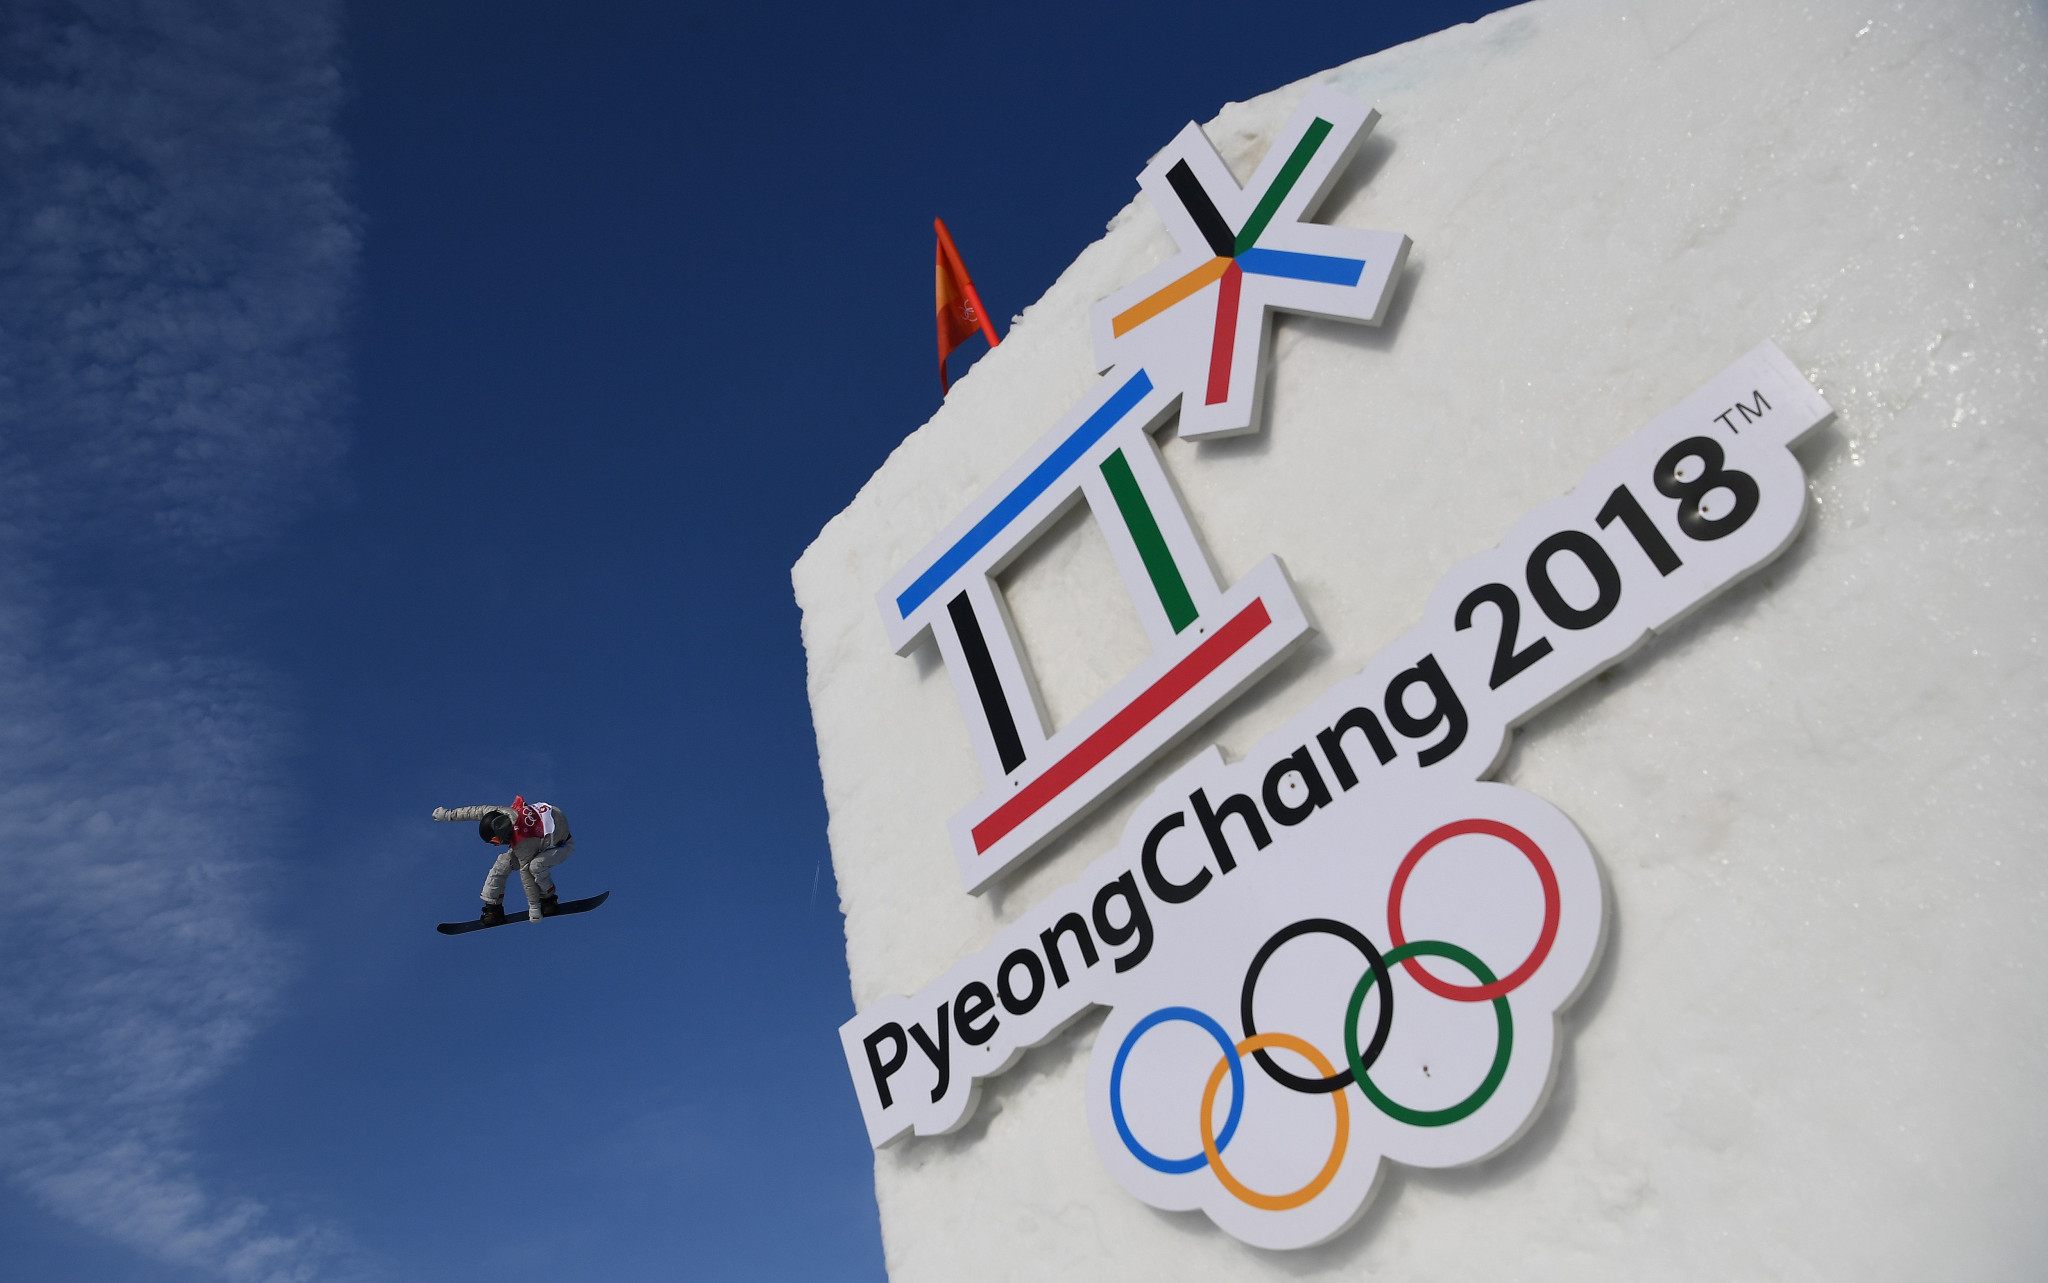 Pyeongchang has emerged as a potential candidate for the 2025 Winter Universiade ©Getty Images